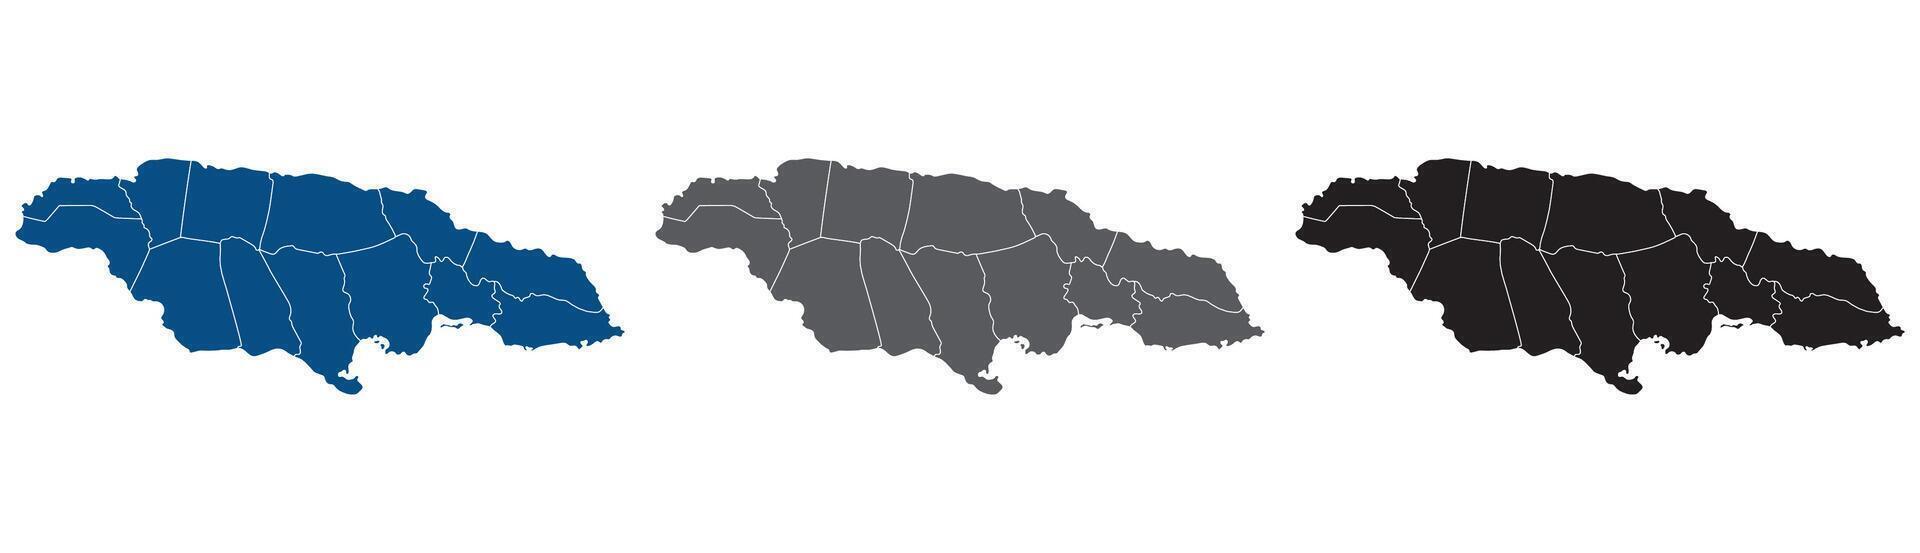 Jamaica map. Map of Jamaica in administrative provinces in set vector